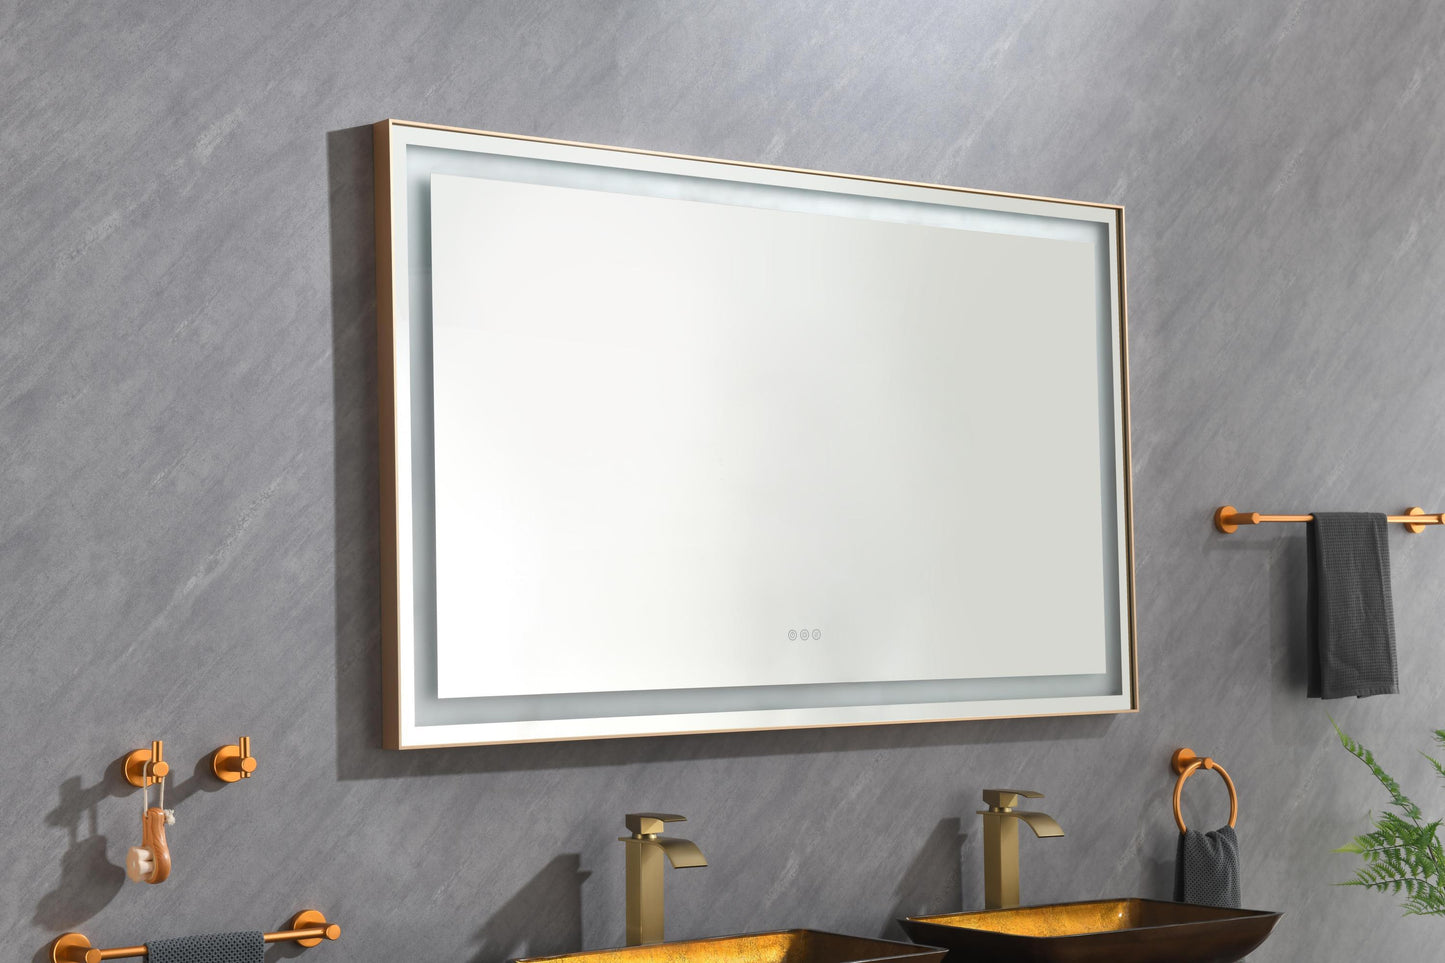 72*36 LED Lighted Bathroom Wall Mounted Mirror with High Lumen+Anti-Fog Separately Control